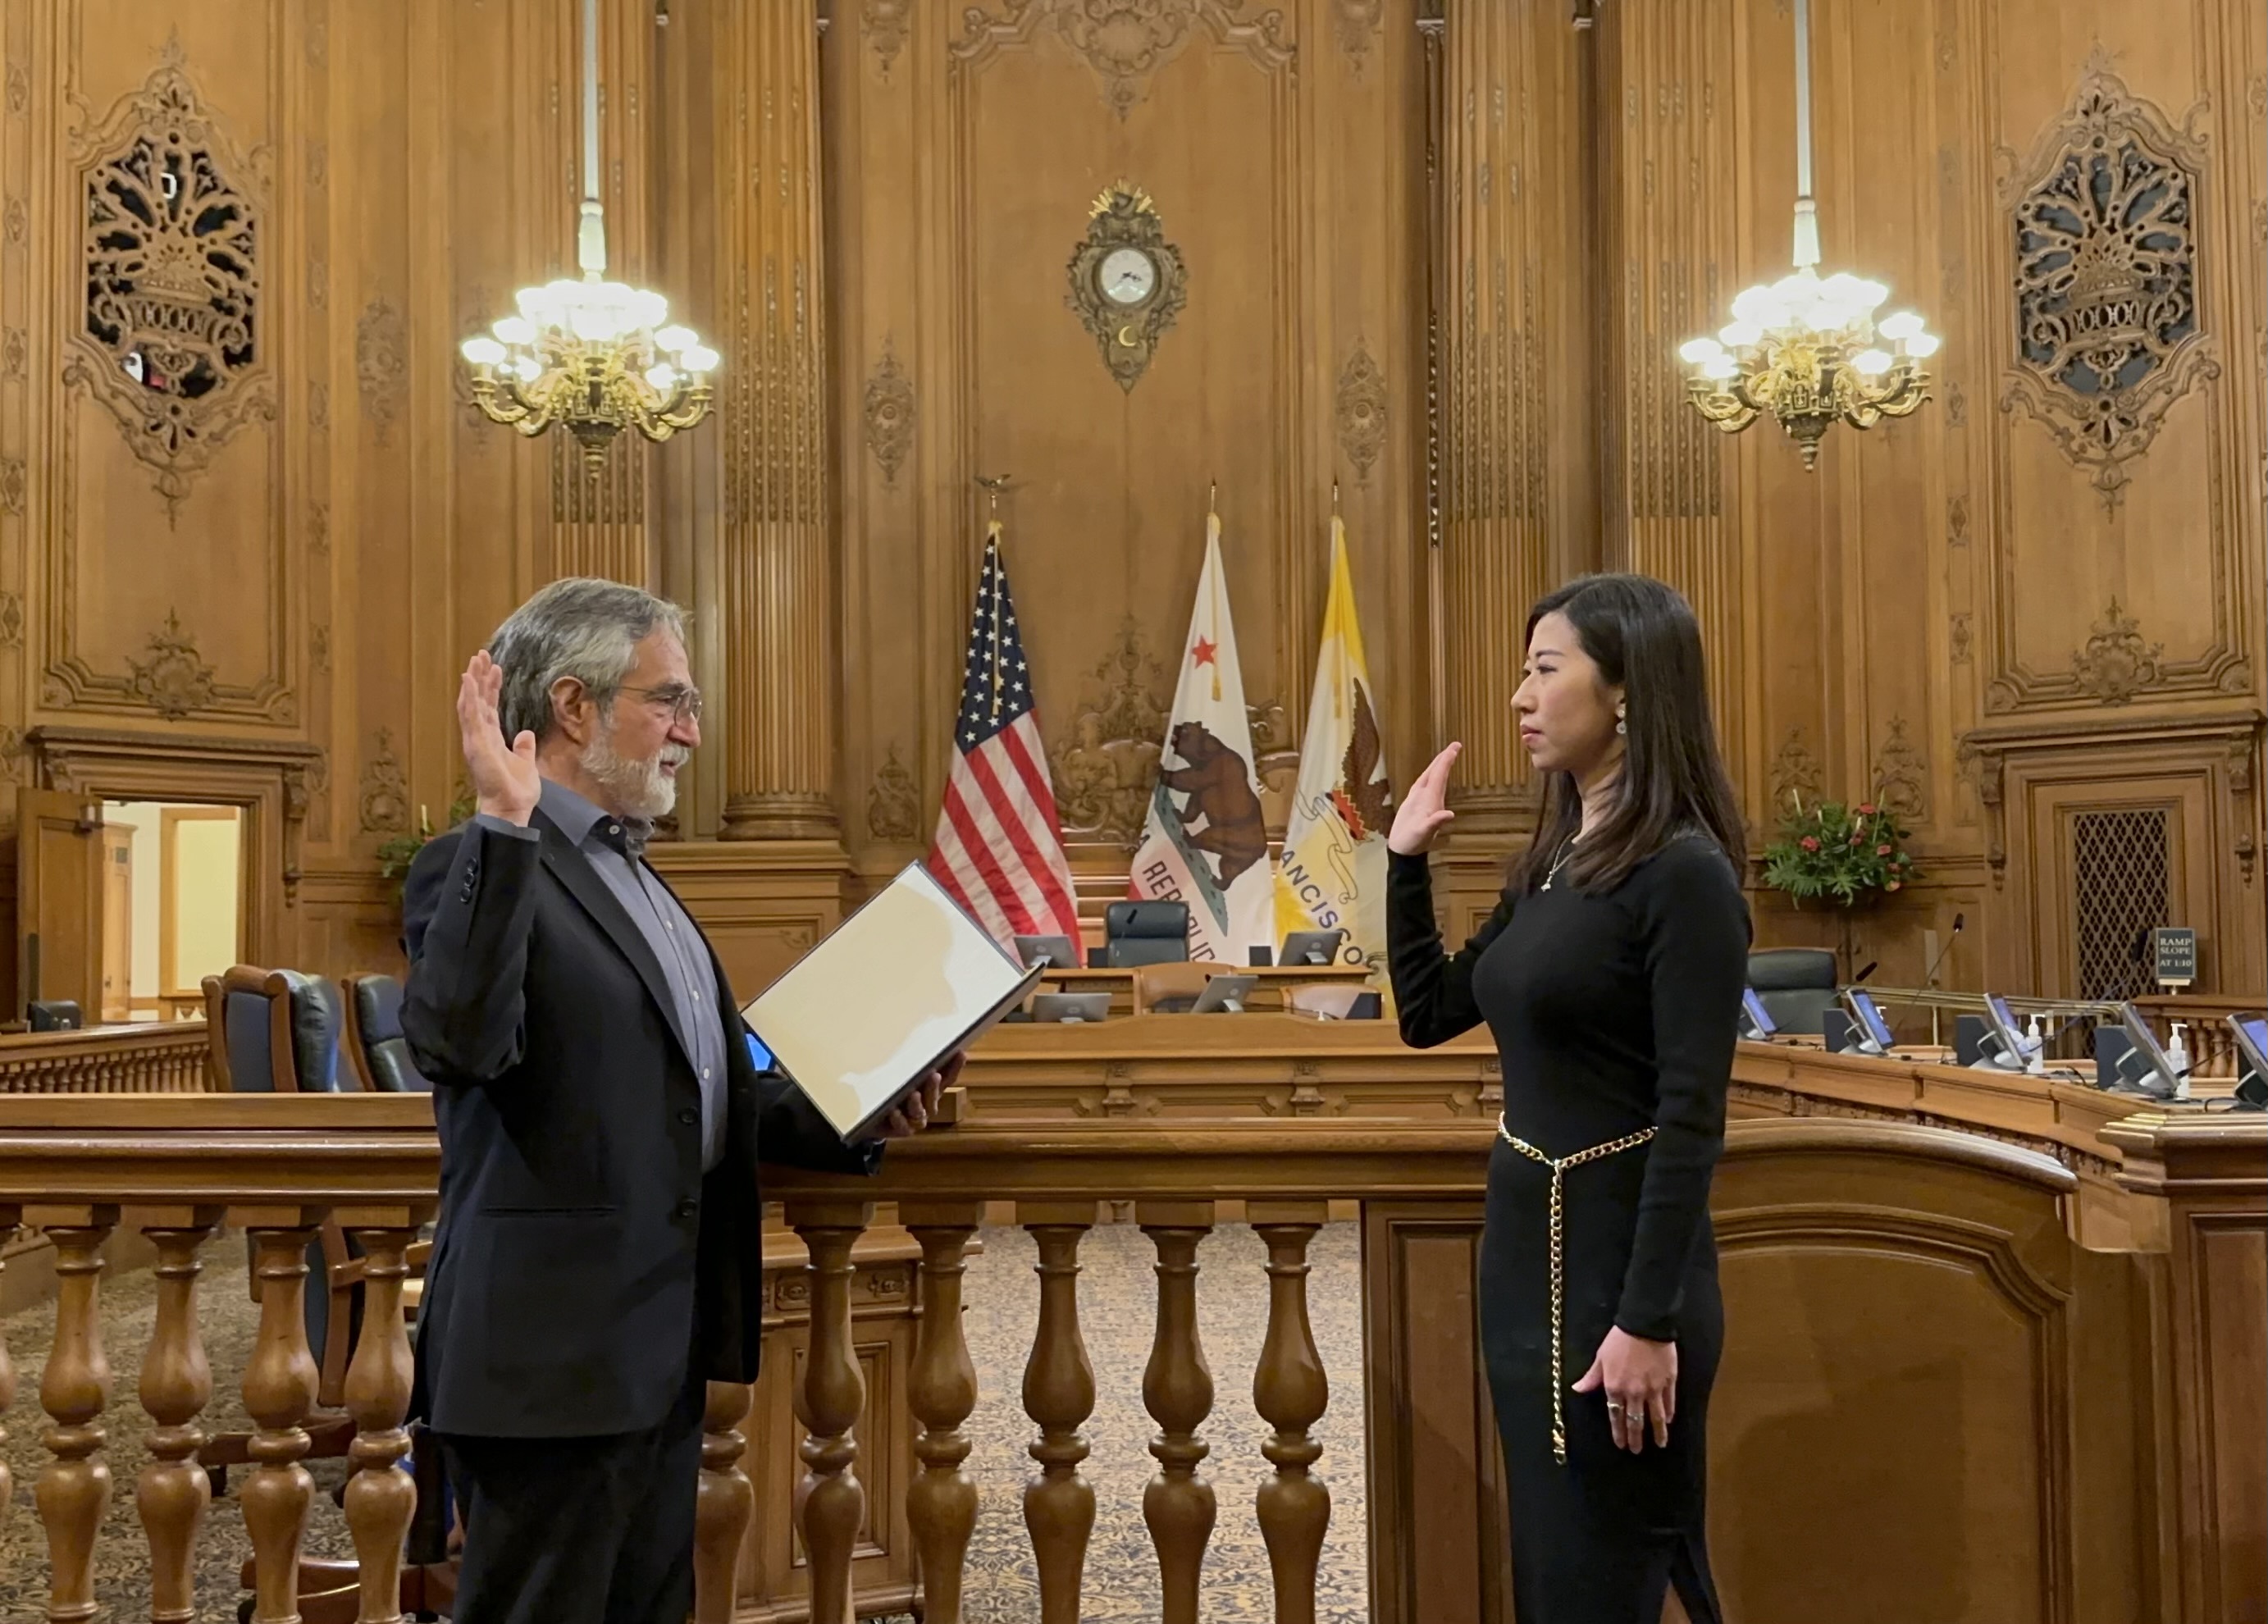 An oath-taking ceremony in a wood-paneled room with two people raising their right hands, an American flag, and ornate décor.